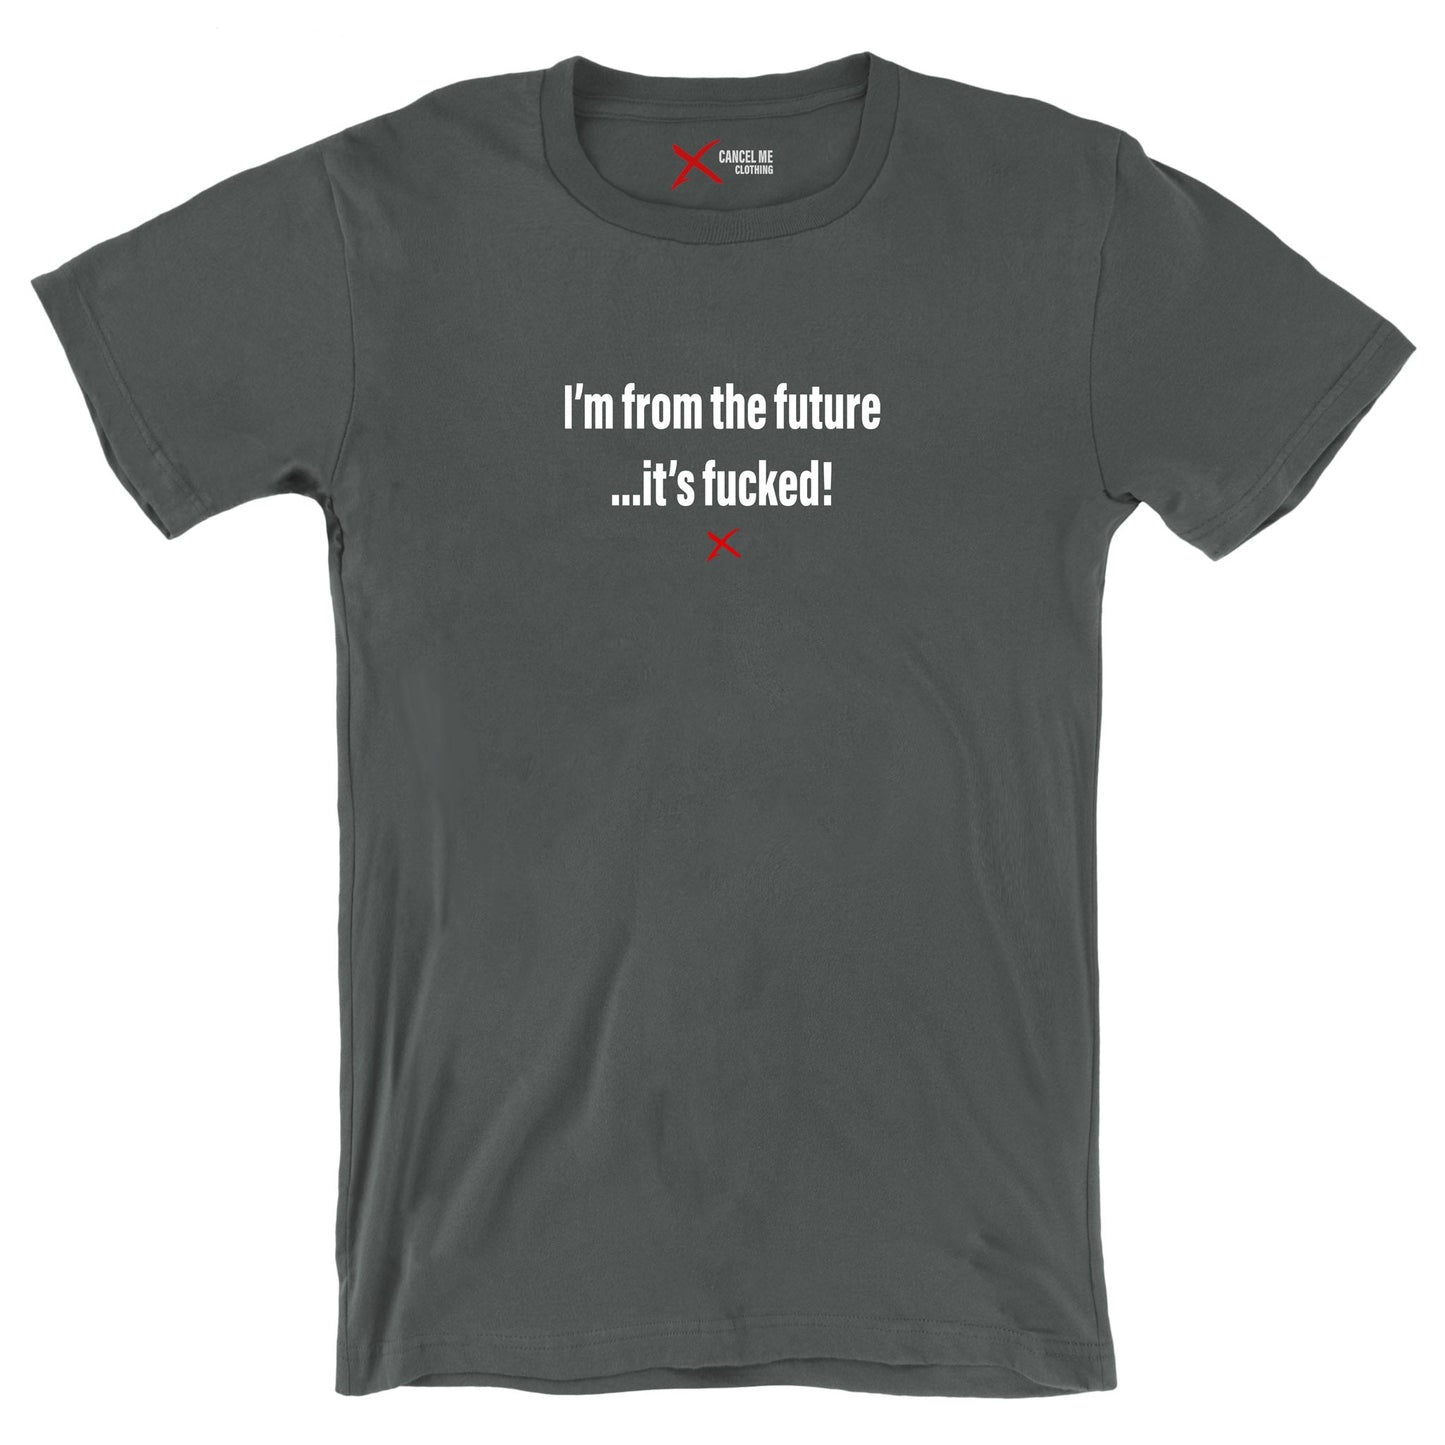 I'm from the future ...it's fucked! - Shirt